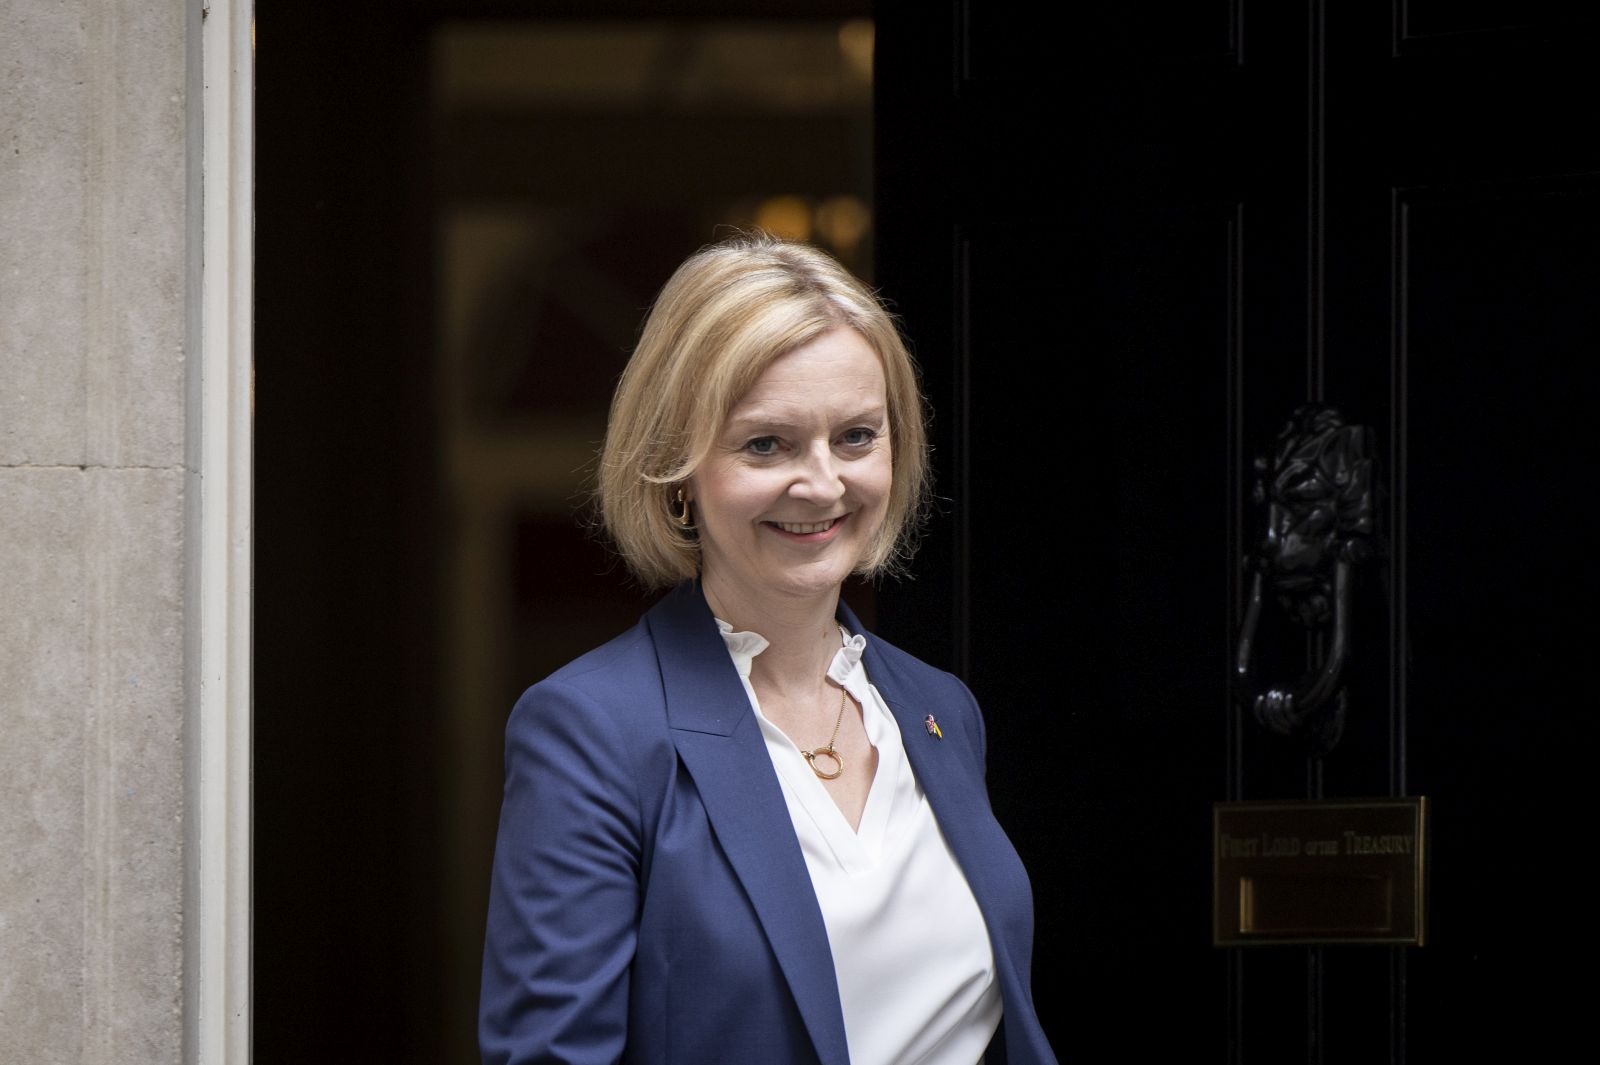 epa10166745 Britain's Prime Minister Liz Truss departs her official residence at 10 Downing Street to appear at her first Prime Minister's Questions at Parliament in London, Britain, 07 September 2022.  Truss will face questions in the Houses of Parliament for the first time since becoming Britain's Prime Minister on 06 September.  EPA/TOLGA AKMEN